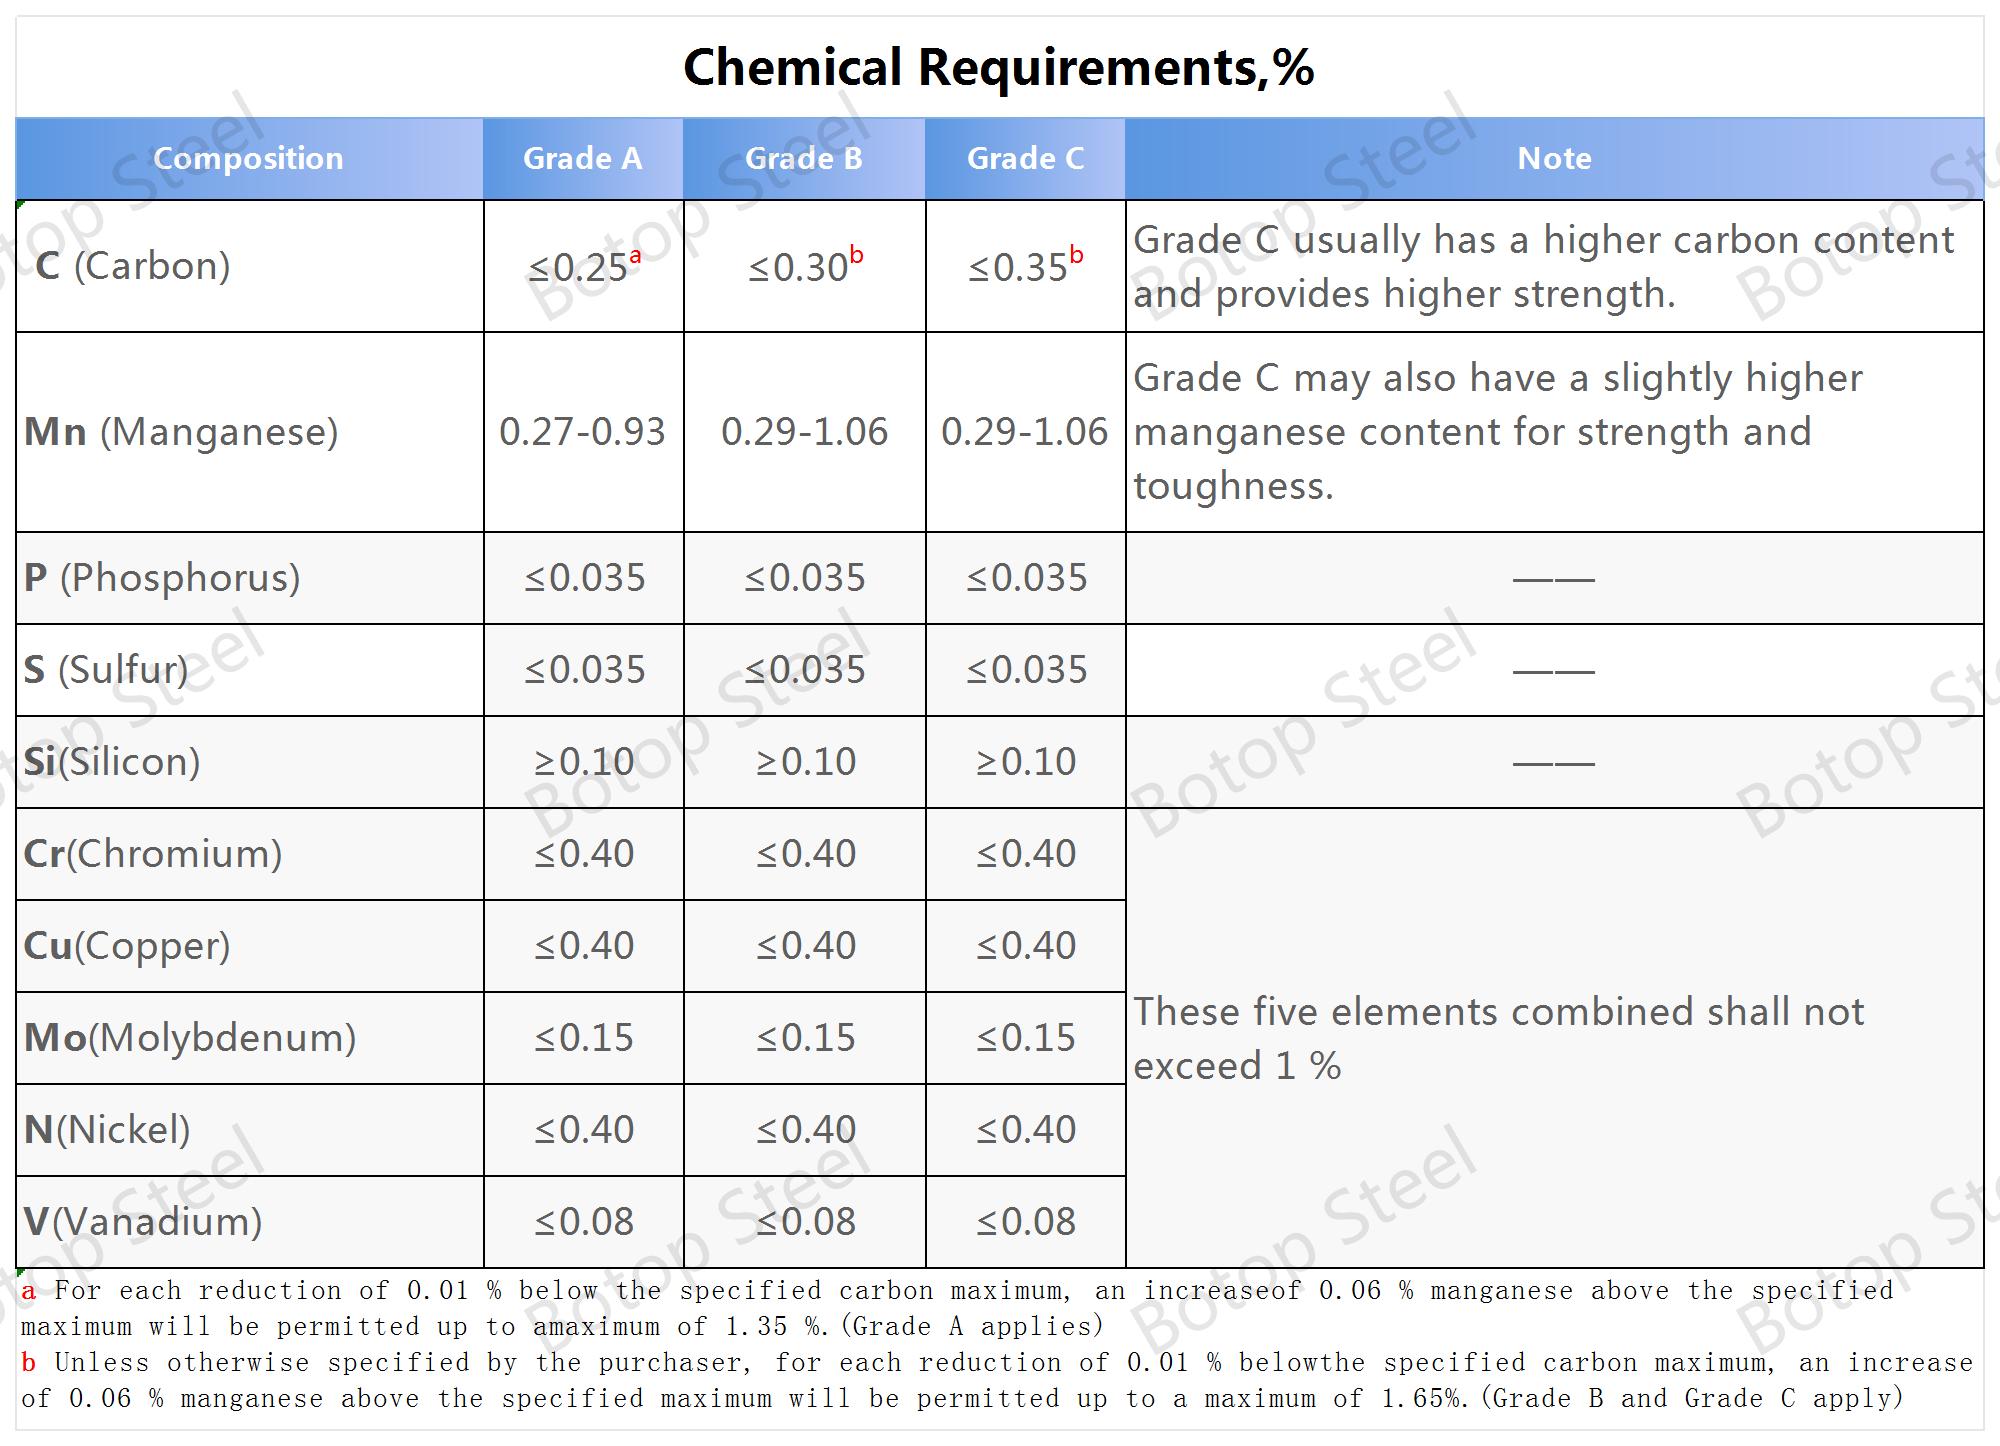 A106_Chemical Requirements